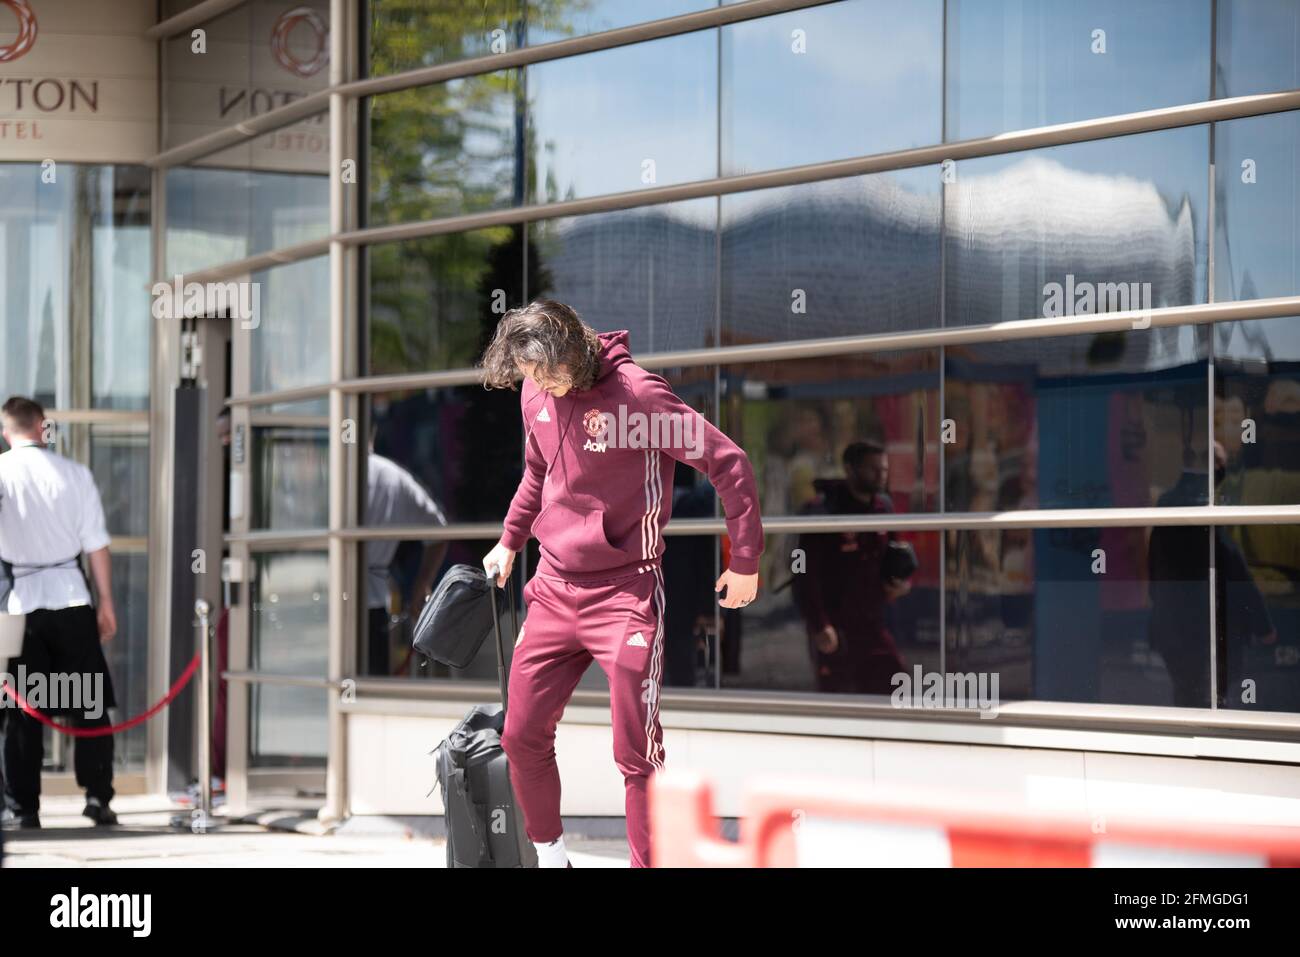 Birmingham, UK. 9th May, 2021. Edinson Cavani struggles with his suitcase as he leaves Clayton Hotel in Birmingham City Centre around midday 9th May before a match against Aston Villa. Credit: Ryan Underwood/Alamy Live News Stock Photo